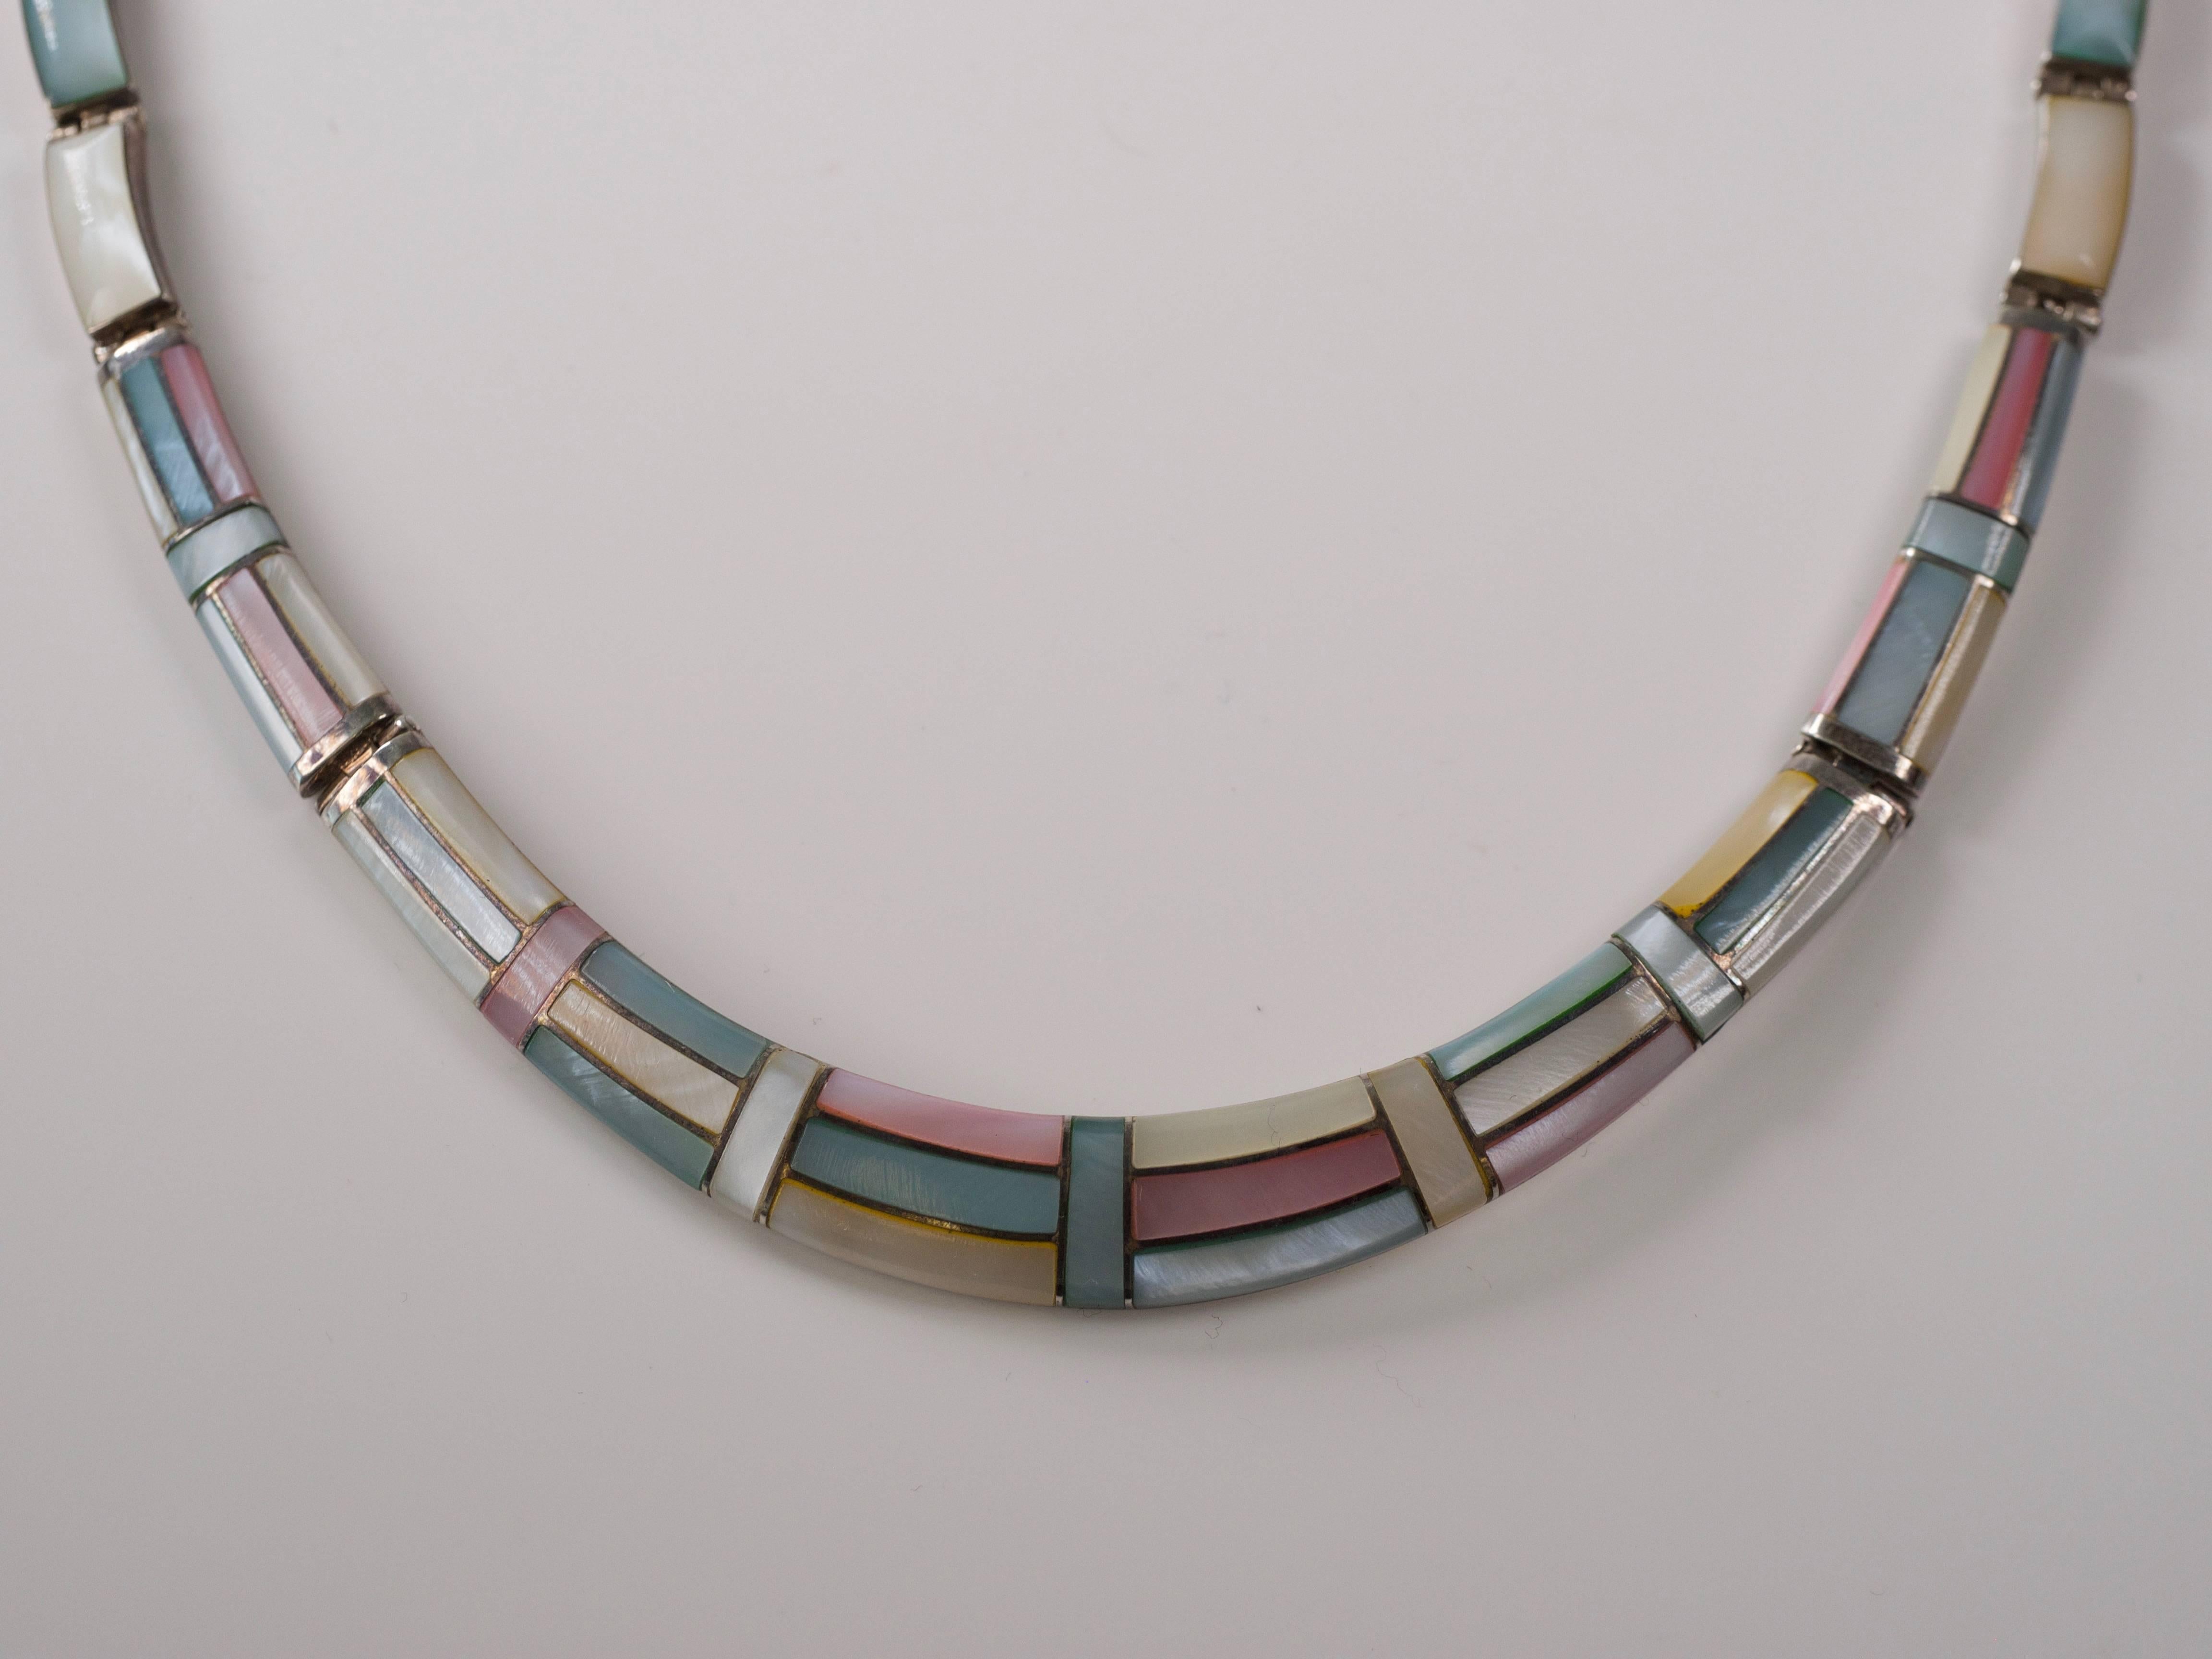 1950s Natural Pastel Shell Inlay with .950 Sterling Silver necklace.

Features Pastel Pink, Light Blue, White and Winter White polished shell inlaid in Sterling silver. The Geometric pattern accentuates the color play and opalescence of the